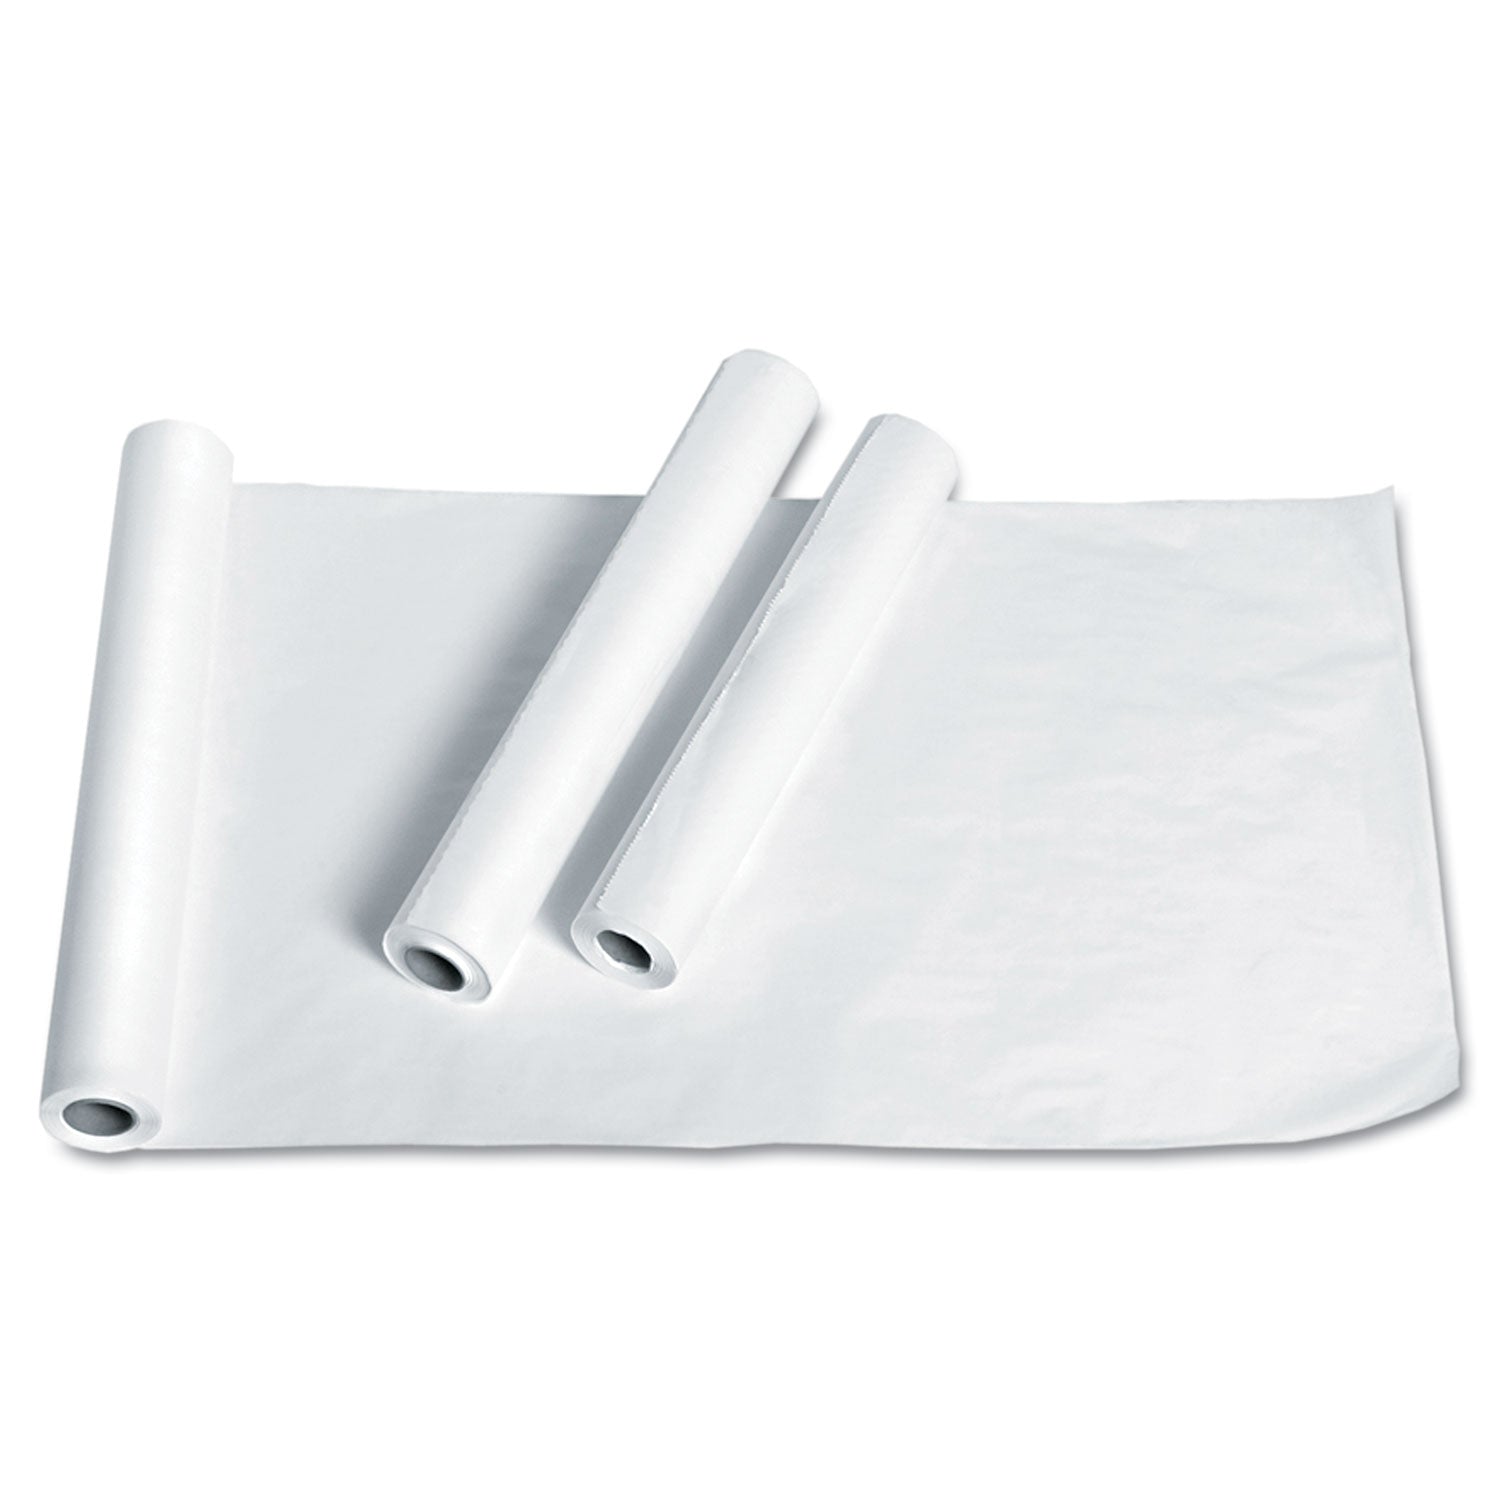 Exam Table Paper, Deluxe Smooth, 18" x 225 ft, White, 12 Rolls/Carton - 